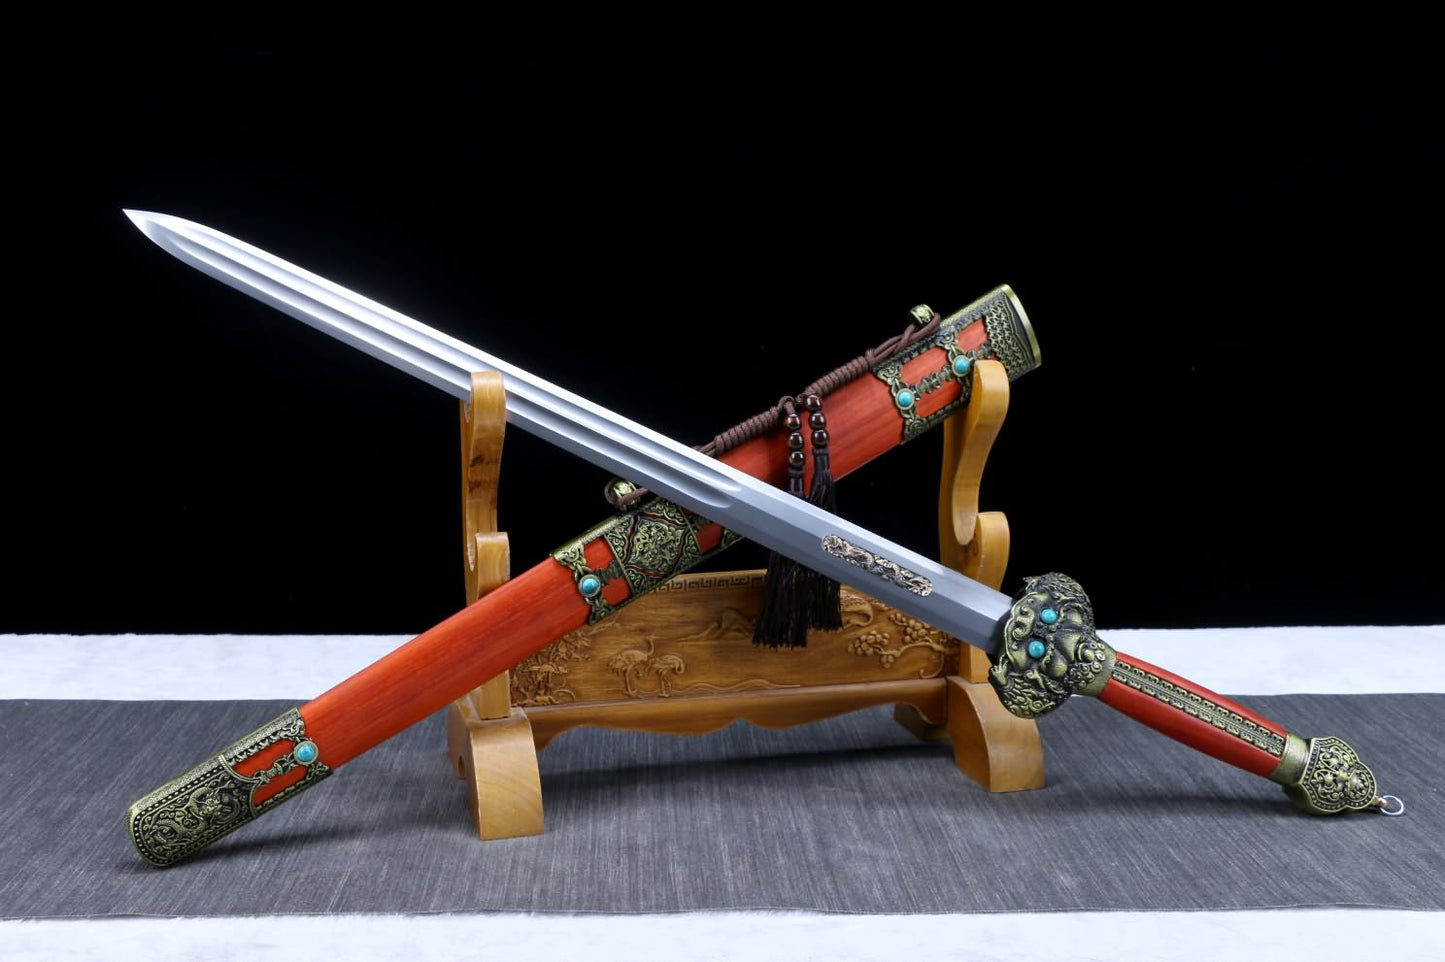 Yongle jian Sword,Hand Forged High Carbon Steel Blades,Redwood Scabbard,Alloy Fittings